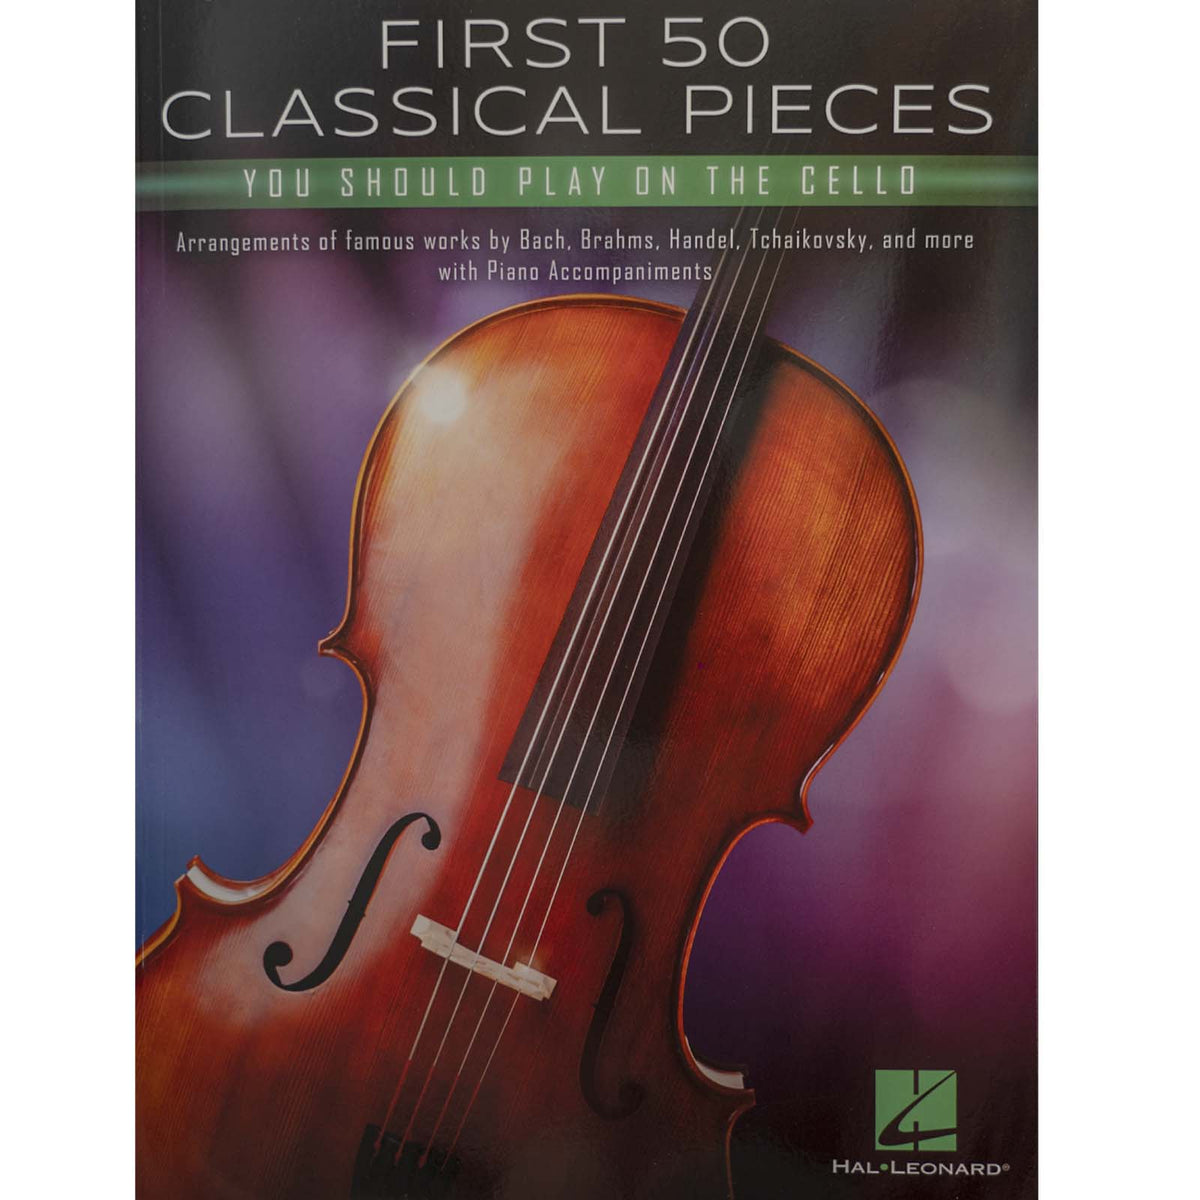 First 50 Classical Pieces You Should Play On The Cello